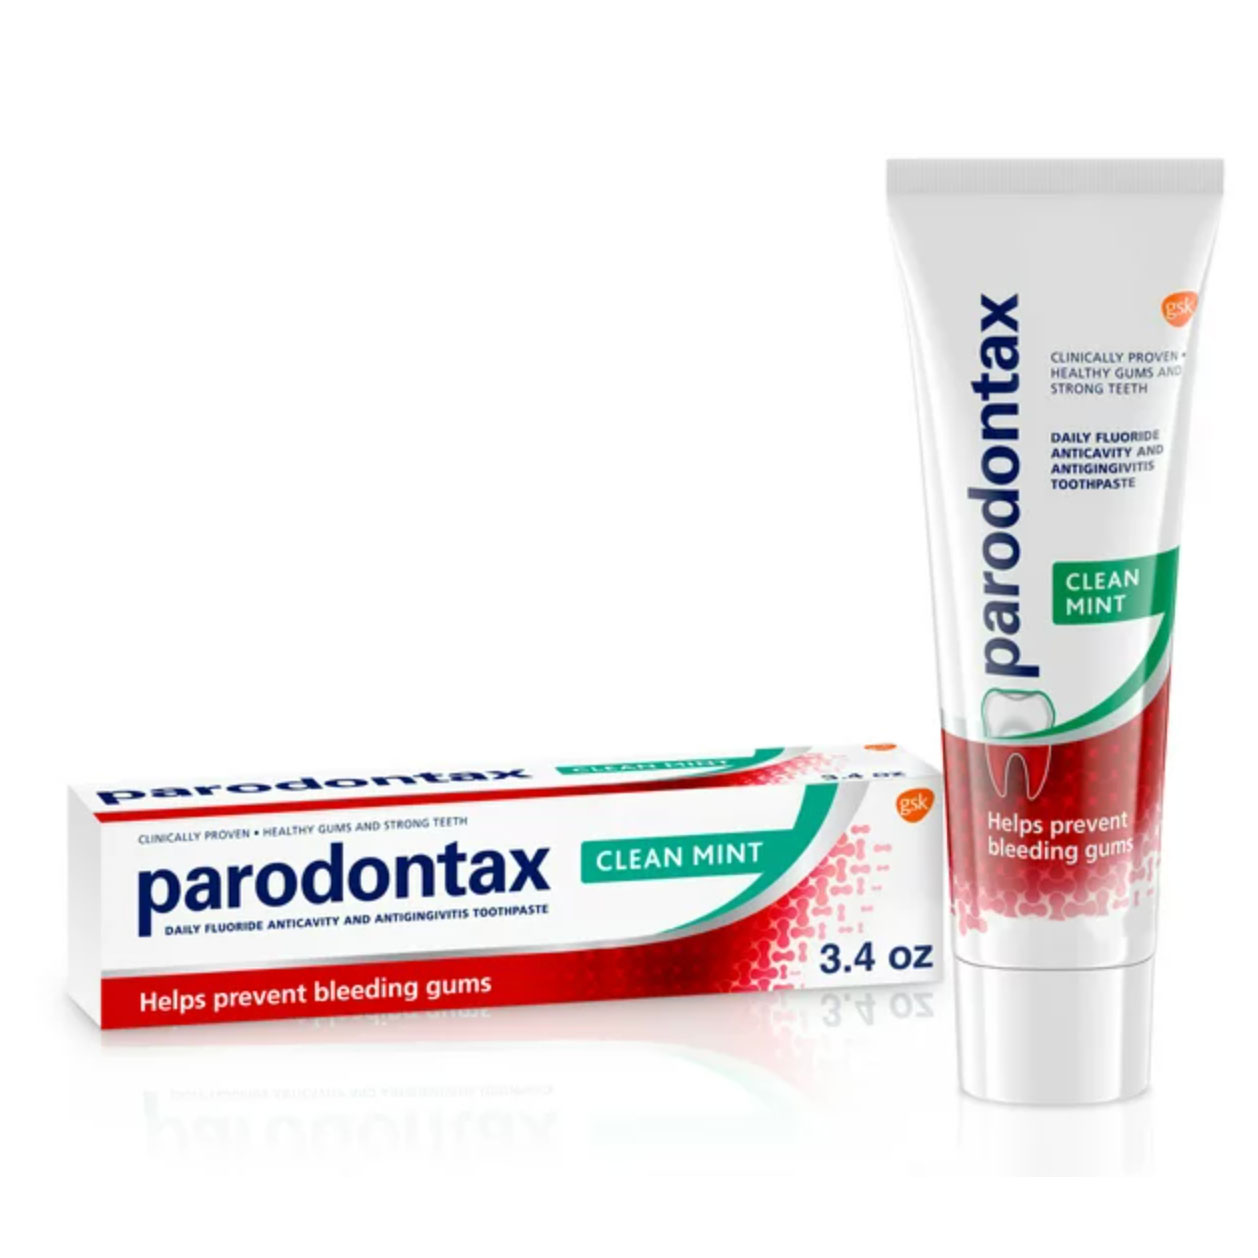 Parodontax Clean Mint Daily Fluoride Toothpaste